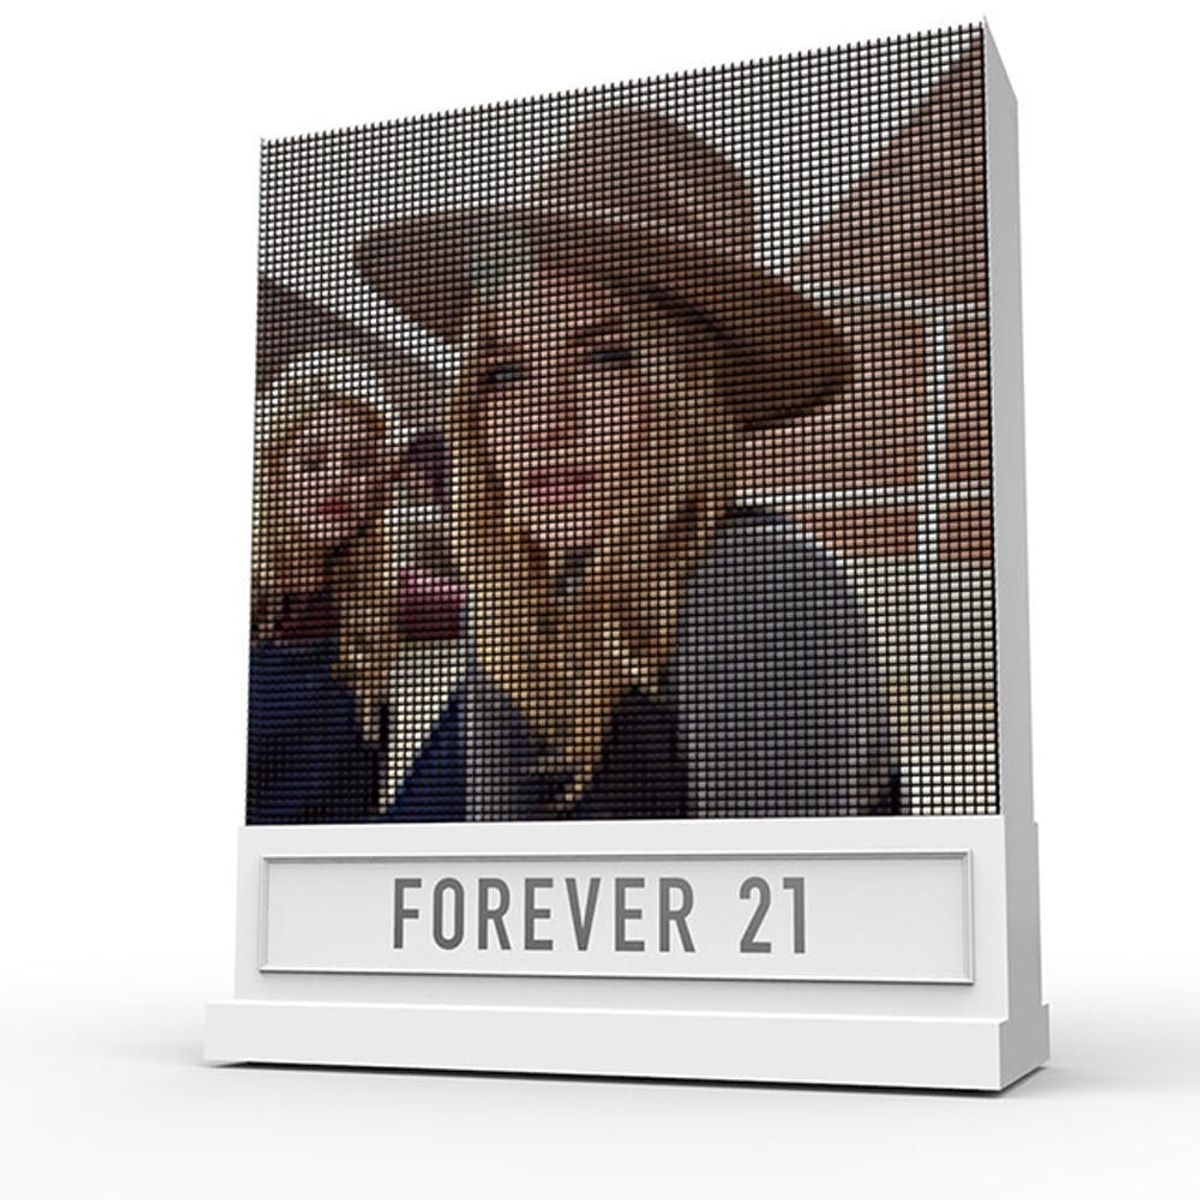 How Forever 21 Is Turning Your Selfies into Art